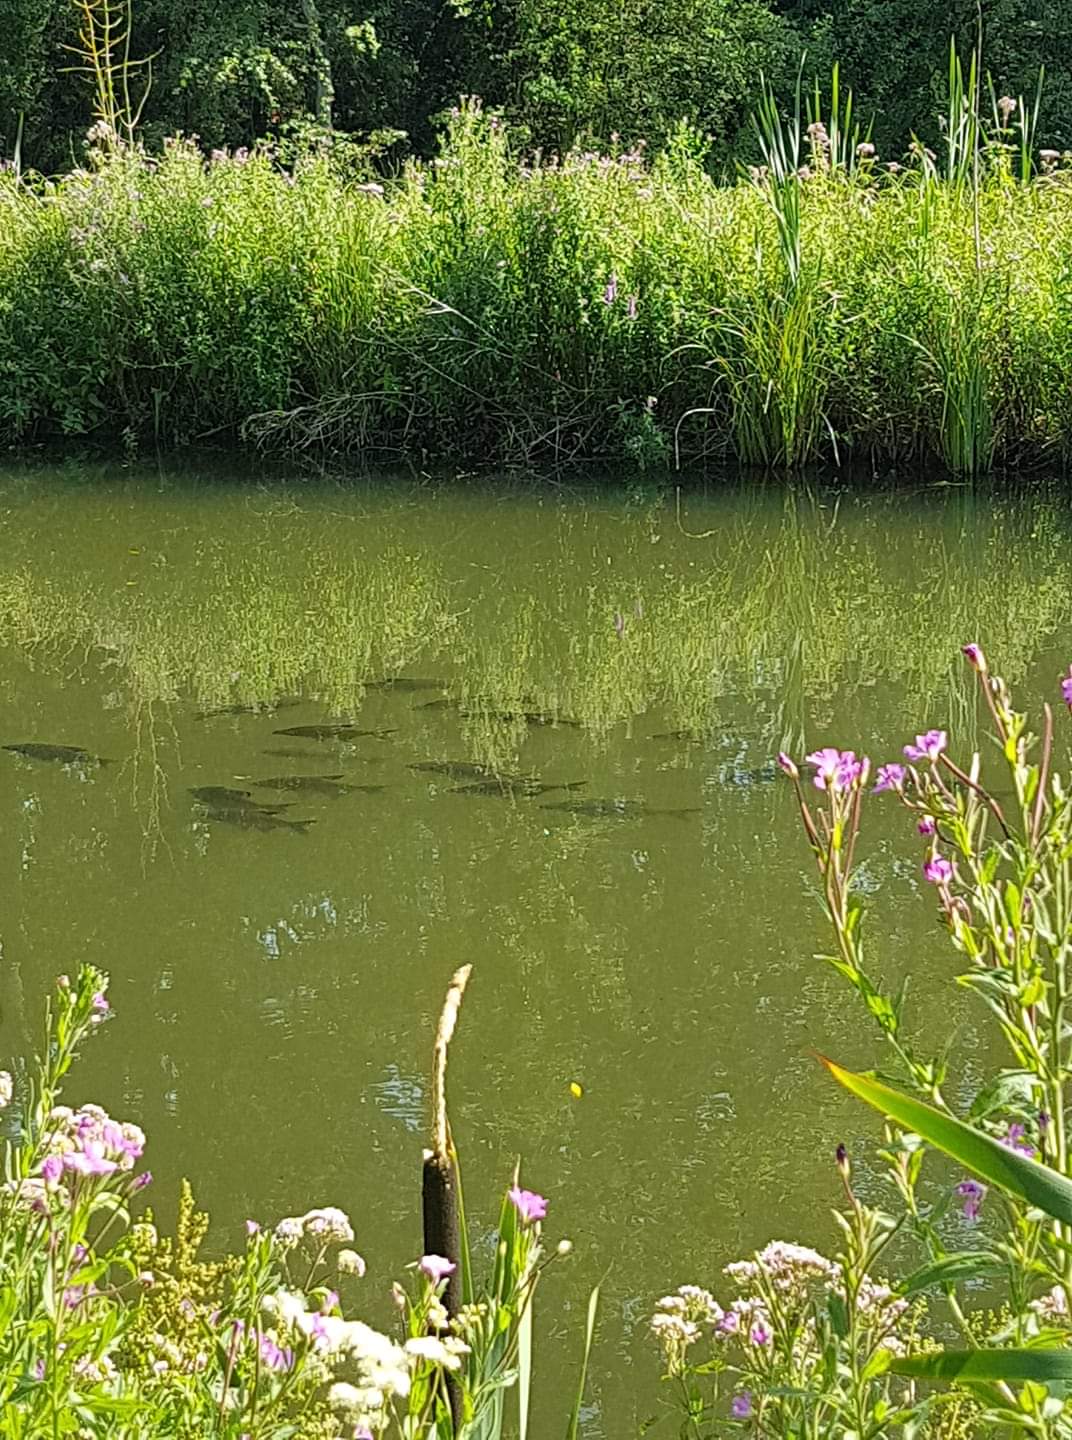 New fish refuge on canal